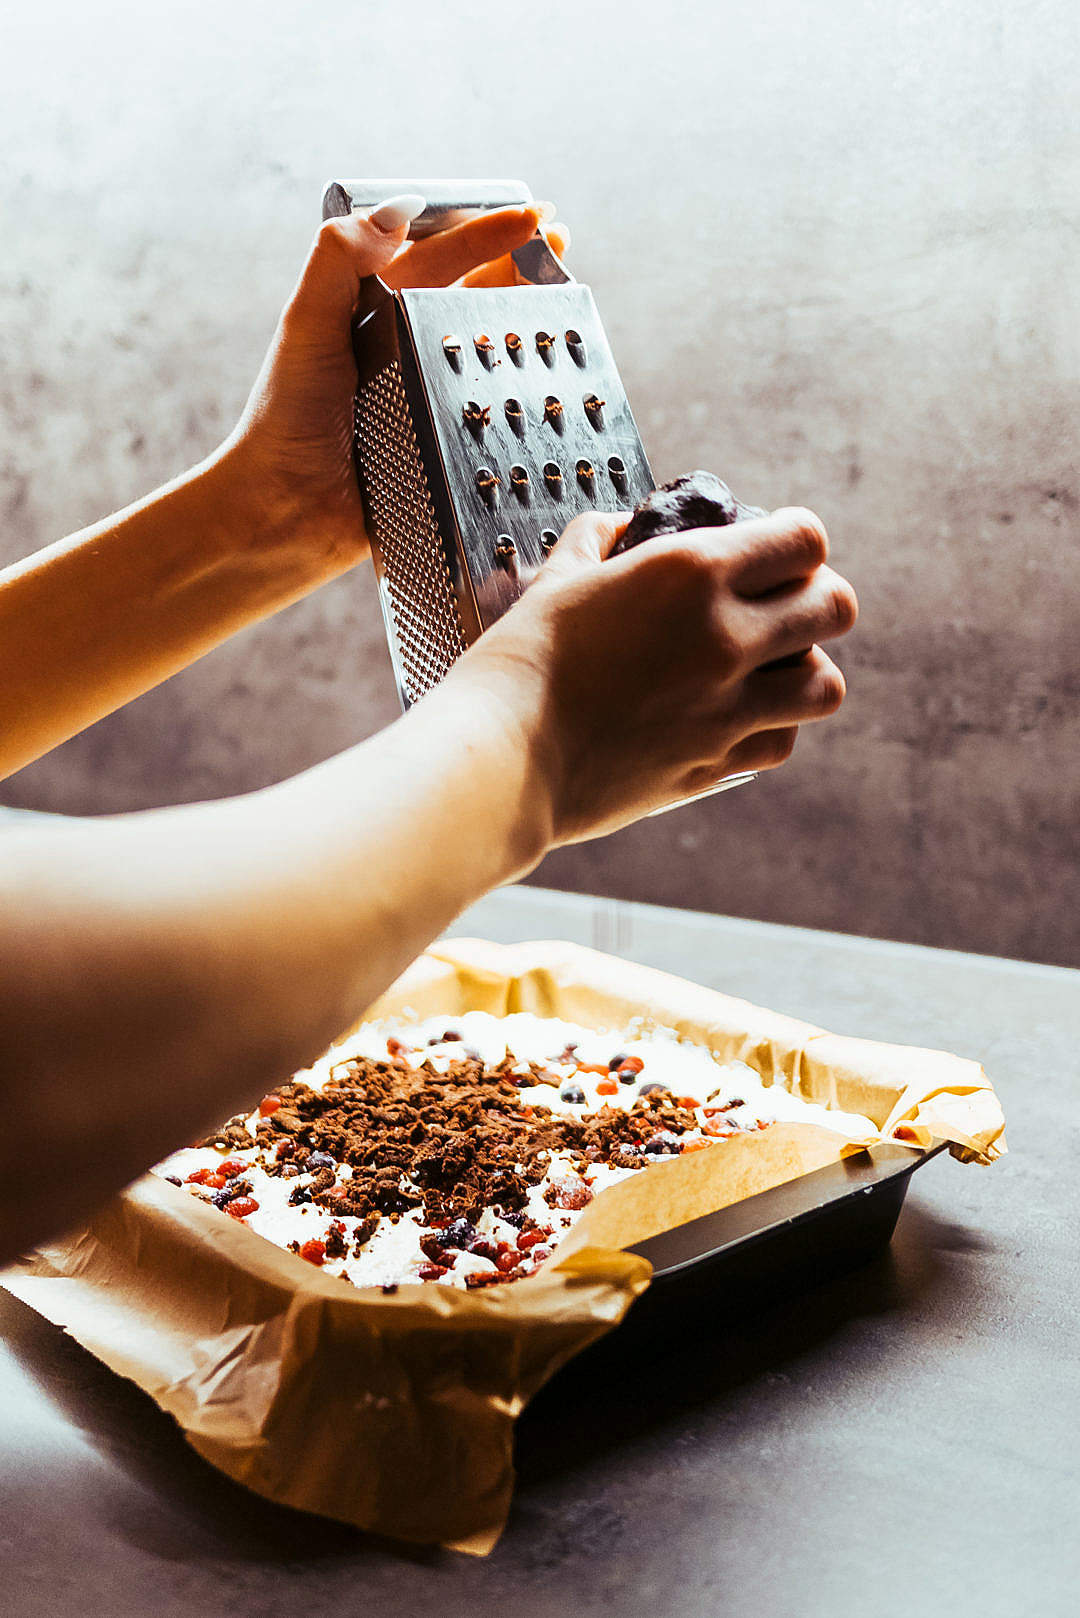 Download Finishing Fruit Cake with Chocolate Streusel FREE Stock Photo